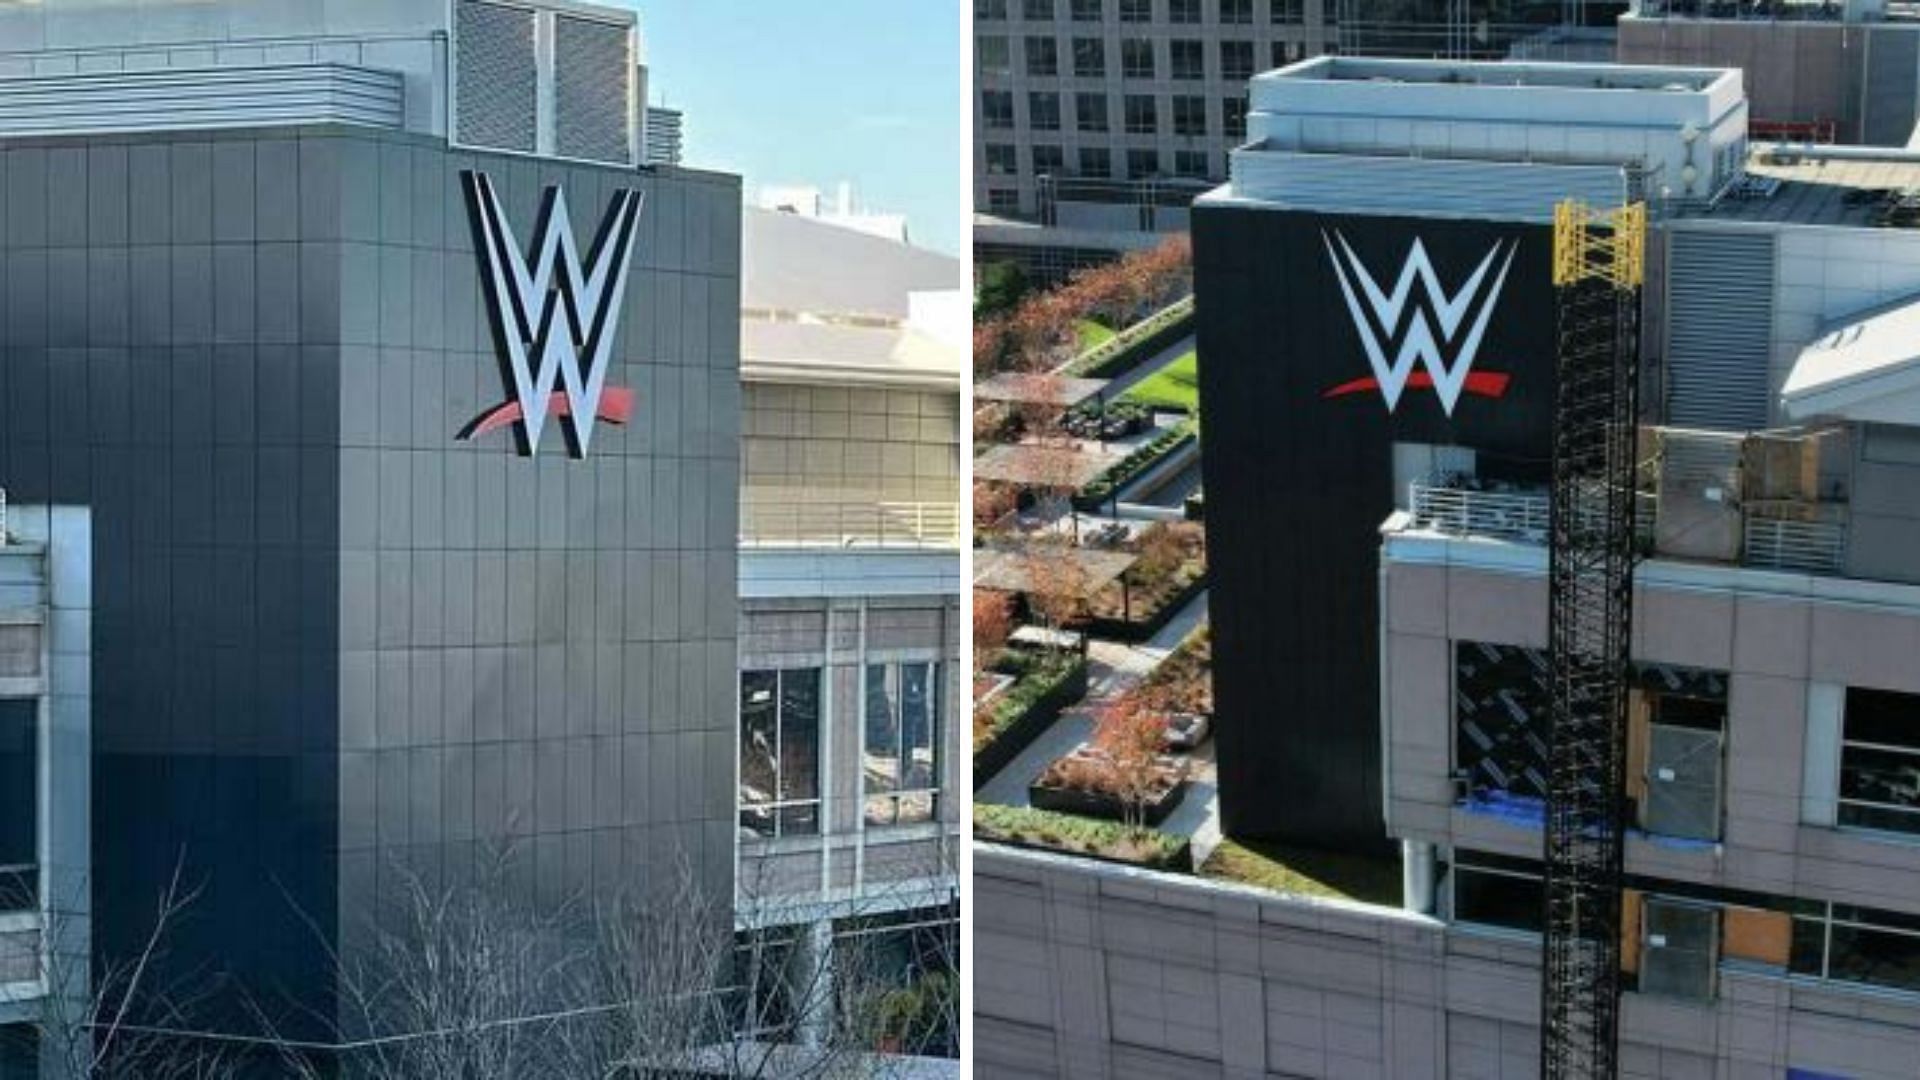 WWE is set to open their new headquarters soon.